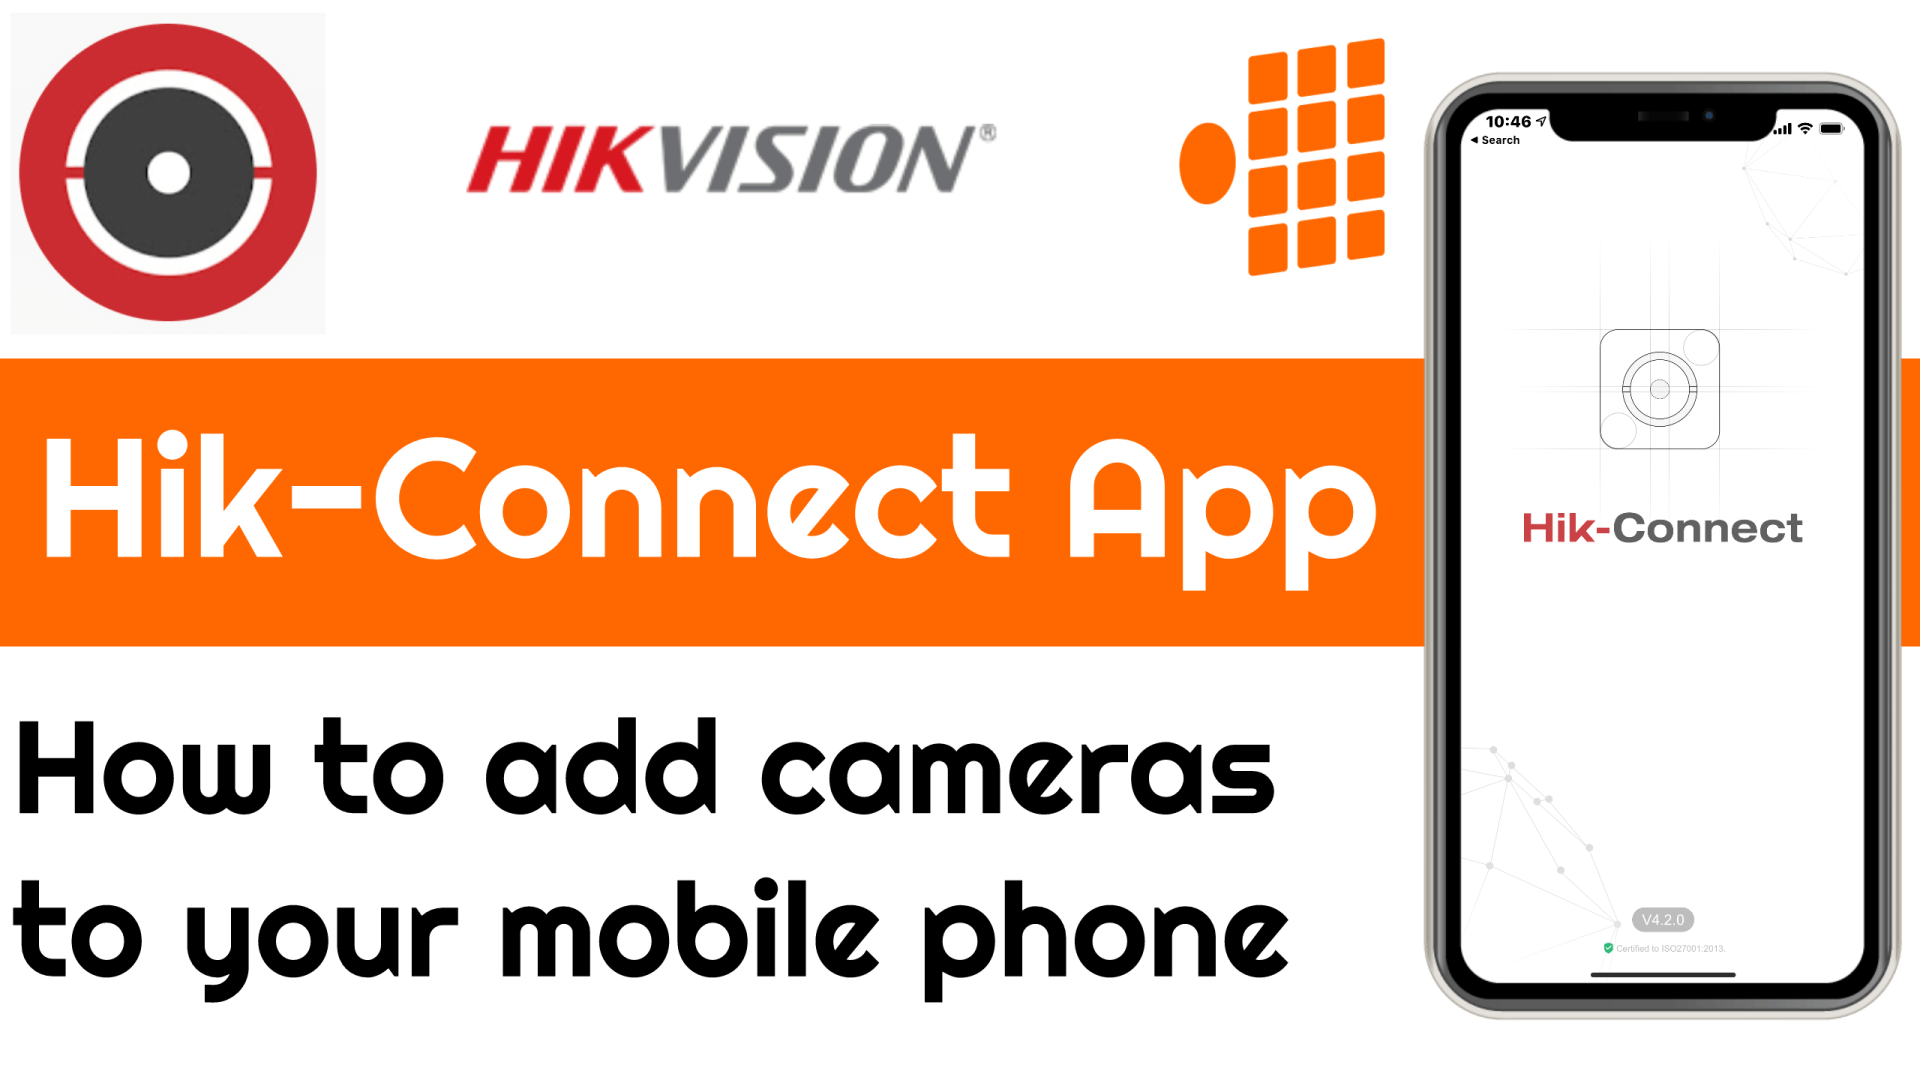 How to set up Hik-Connect on your mobile phone.